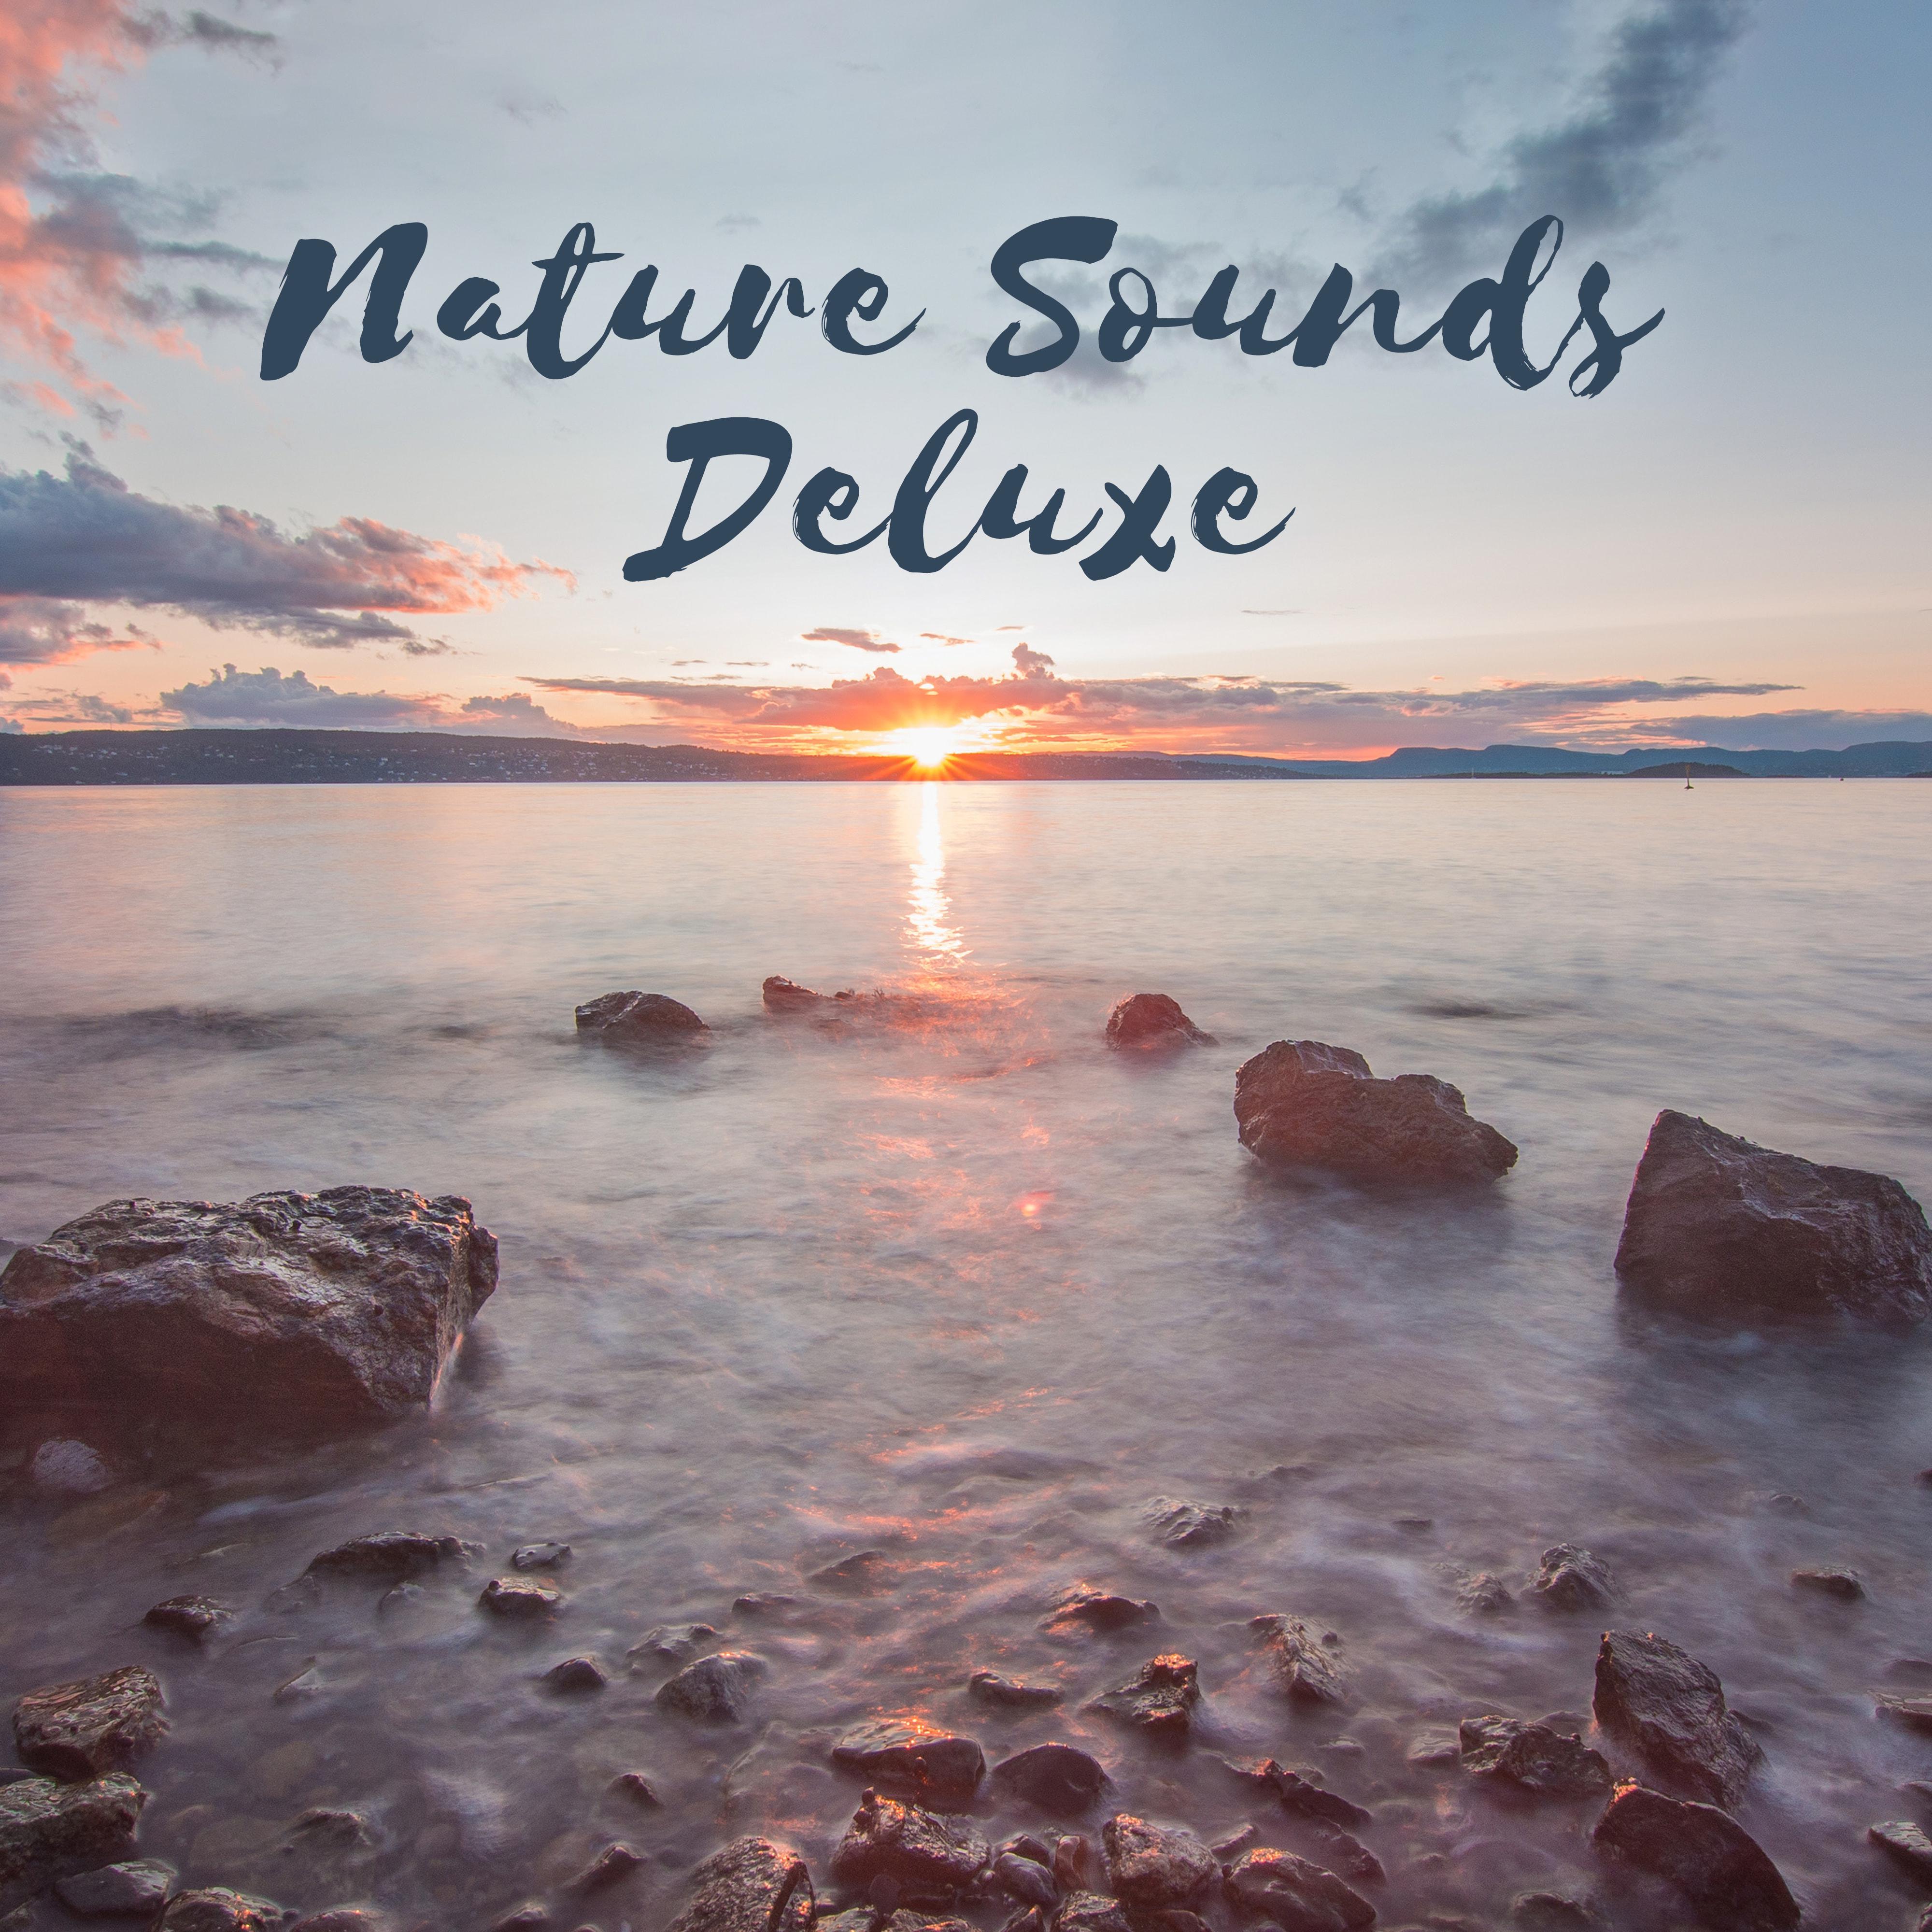 Nature Sounds Deluxe  Nature Music for Yoga, Meditation, Relaxation, Spa